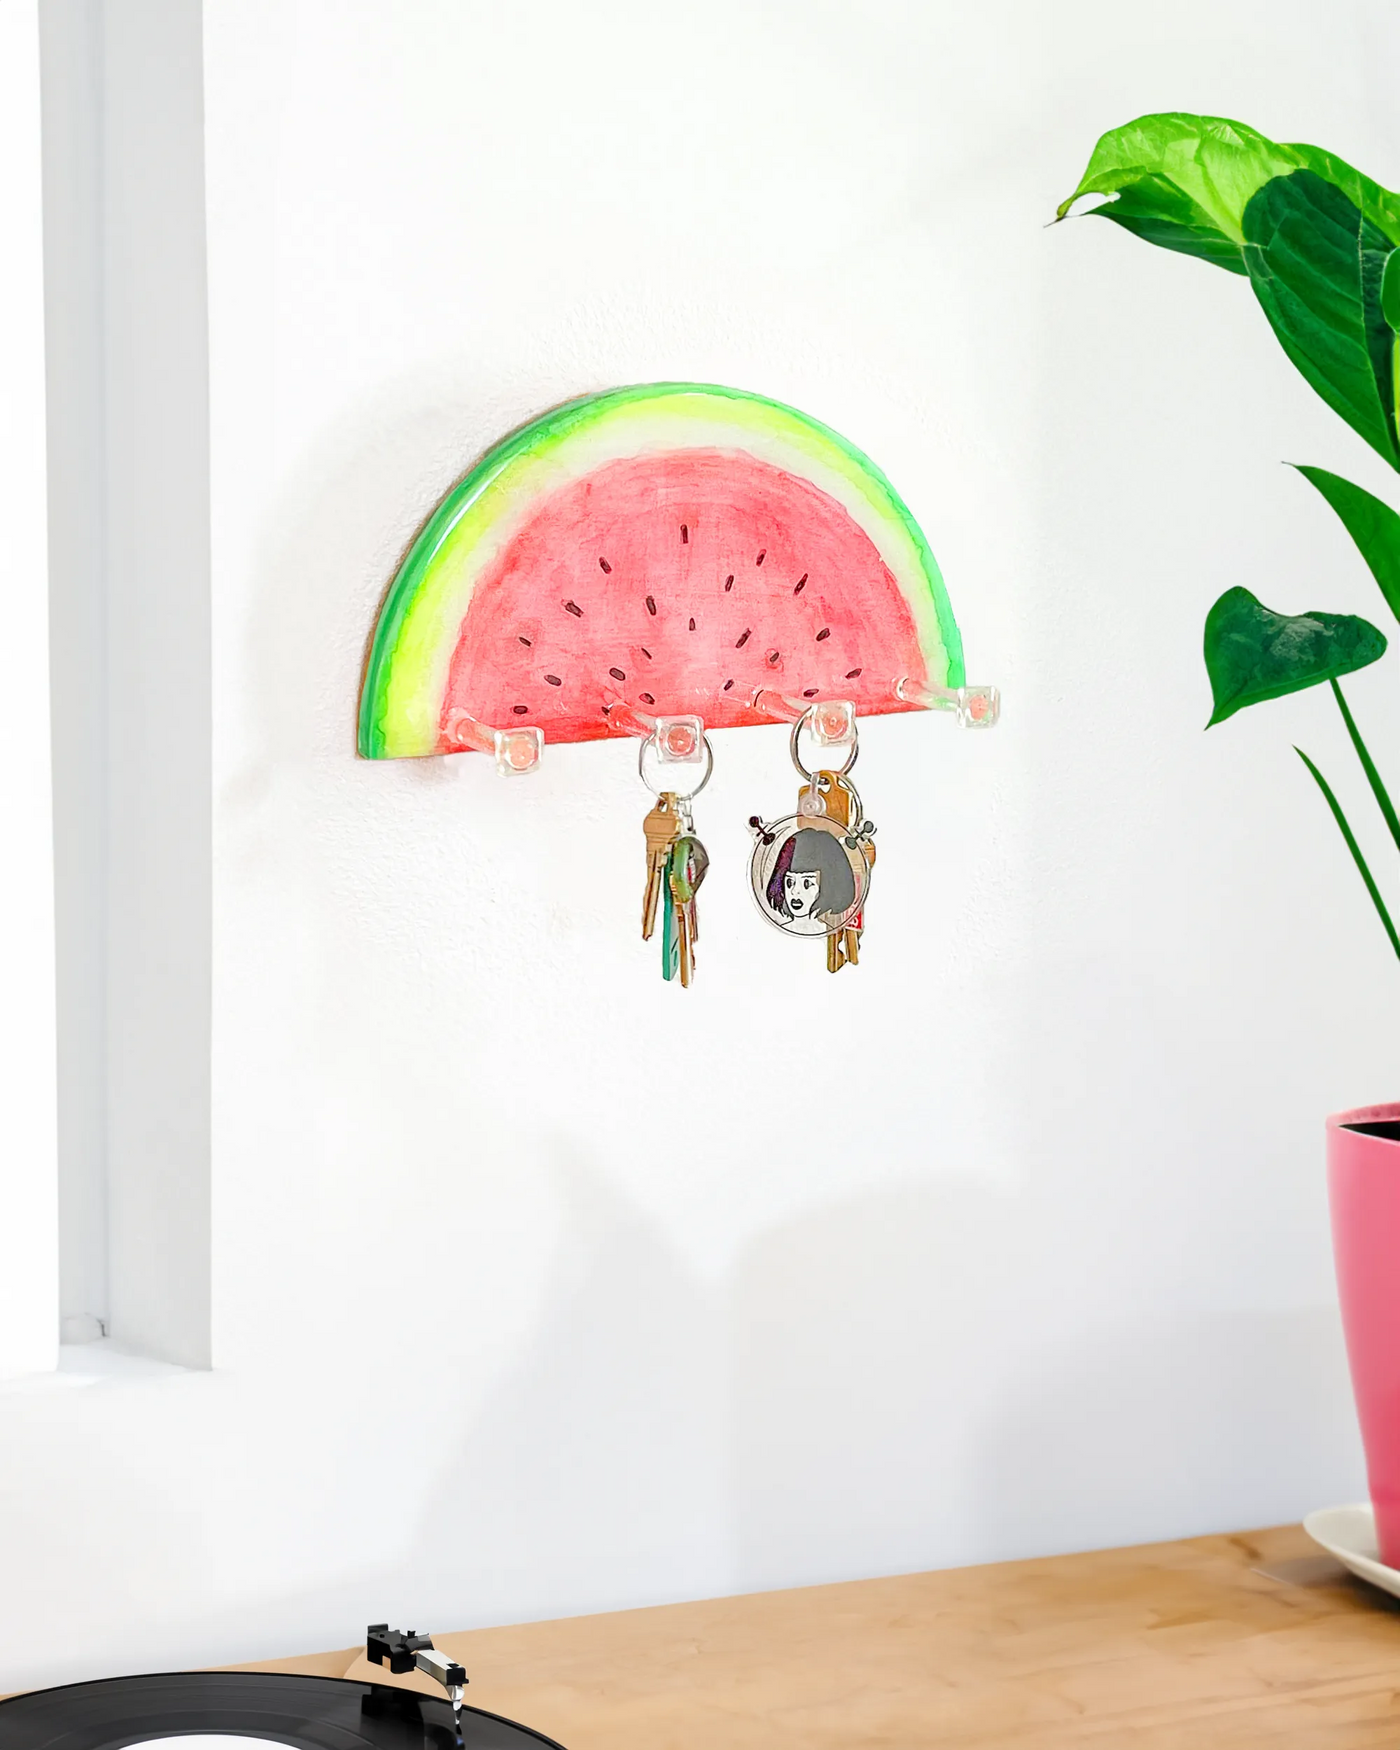 Hand-painted watermelon slice key holder with vibrant red and green colors on a wooden base